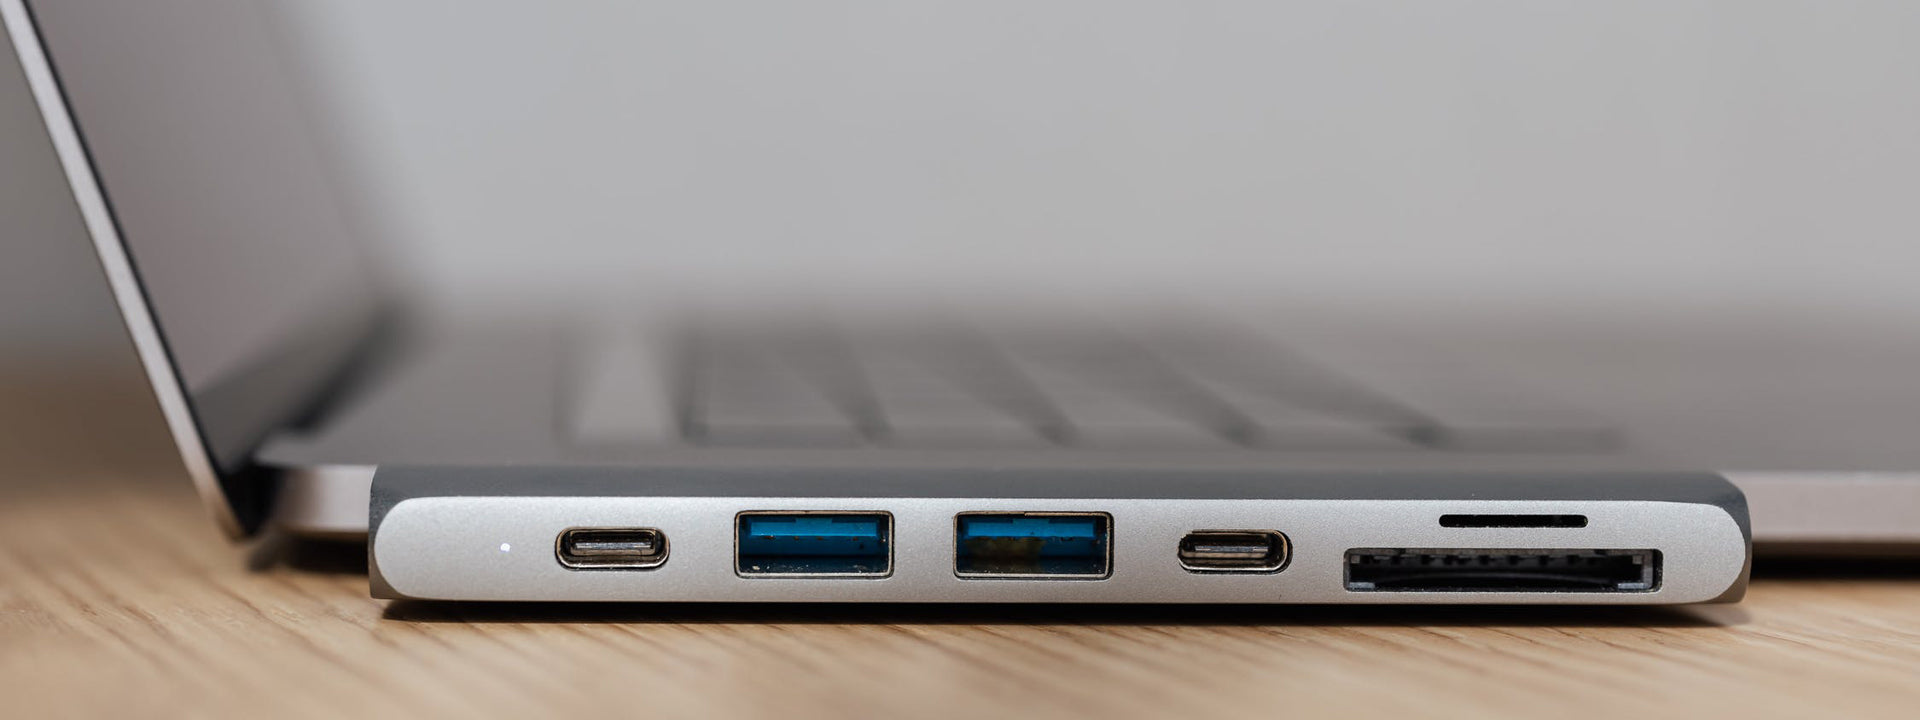 What's the Difference Between Thunderbolt 3 and USB-C